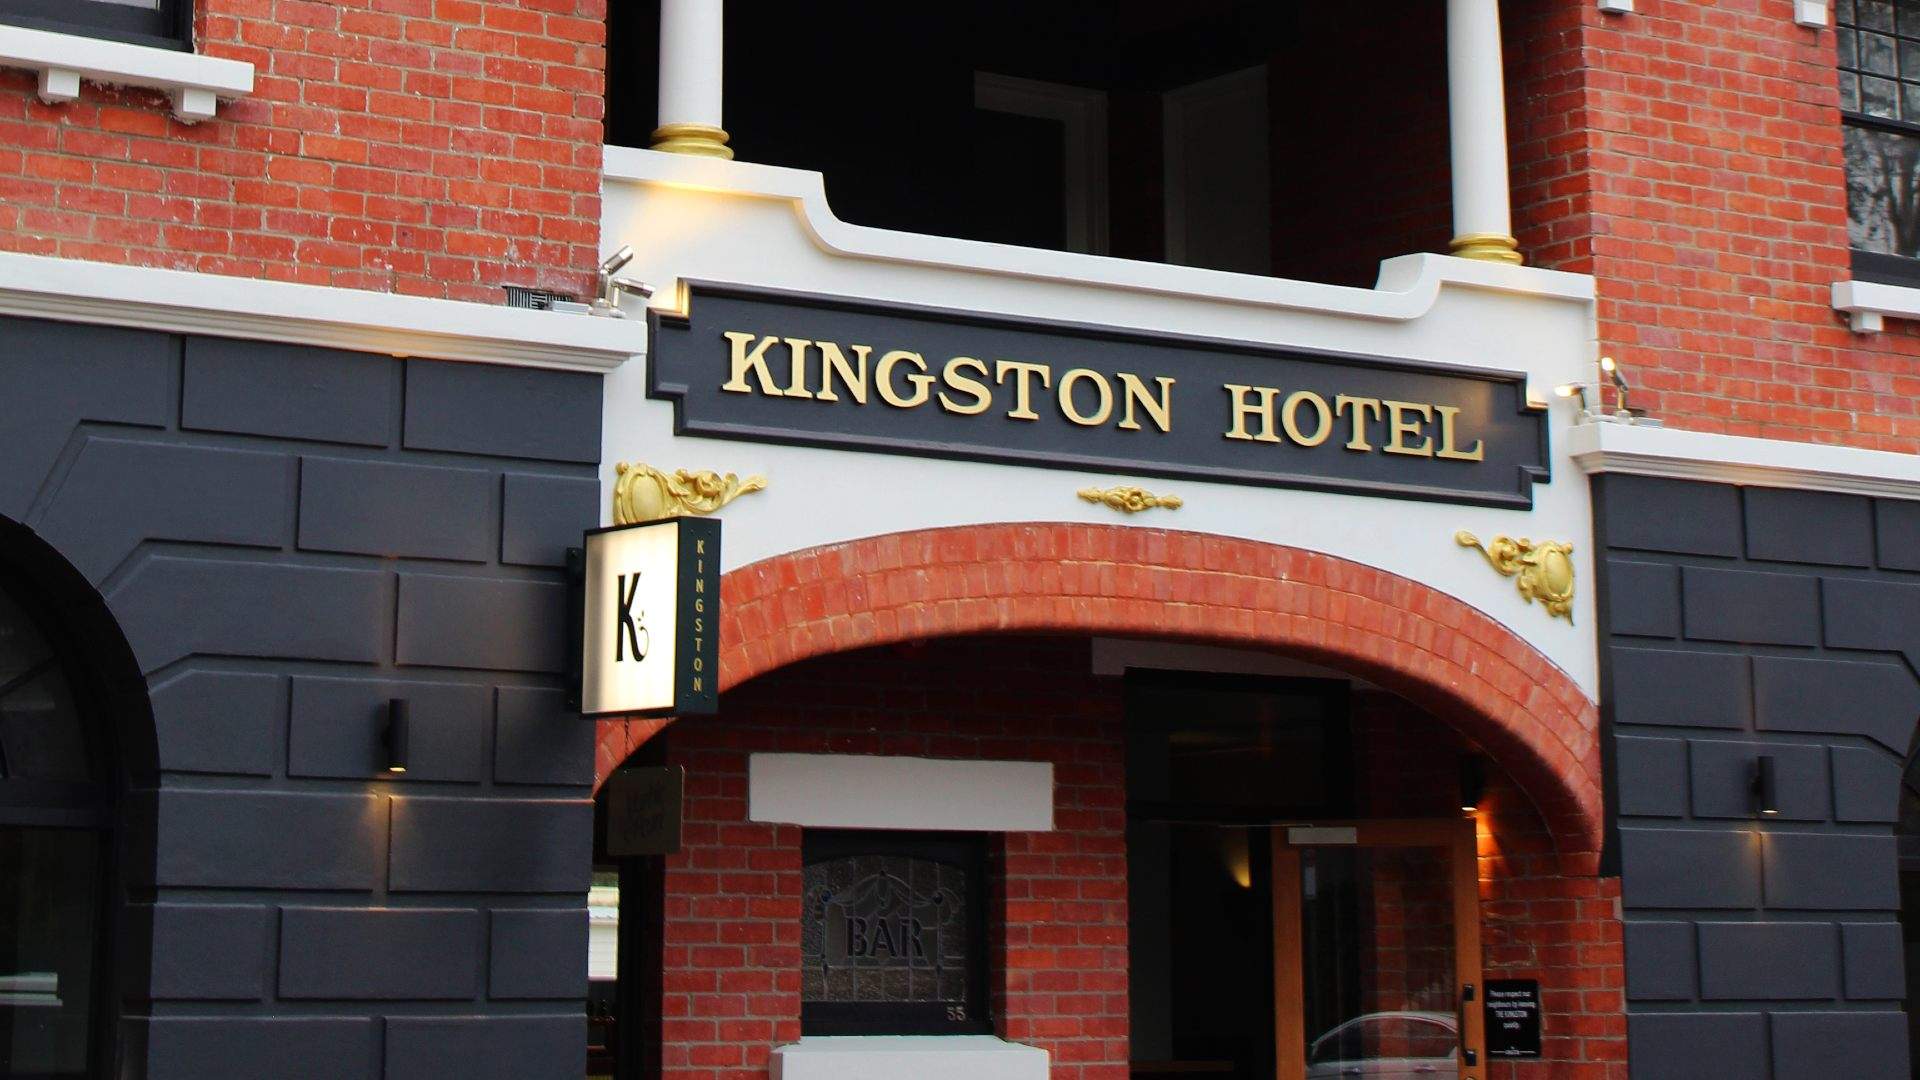 Now Open: Richmond Pub The Kingston Has Reopened Following a Head-to-Toe Makeover by the Public House Team